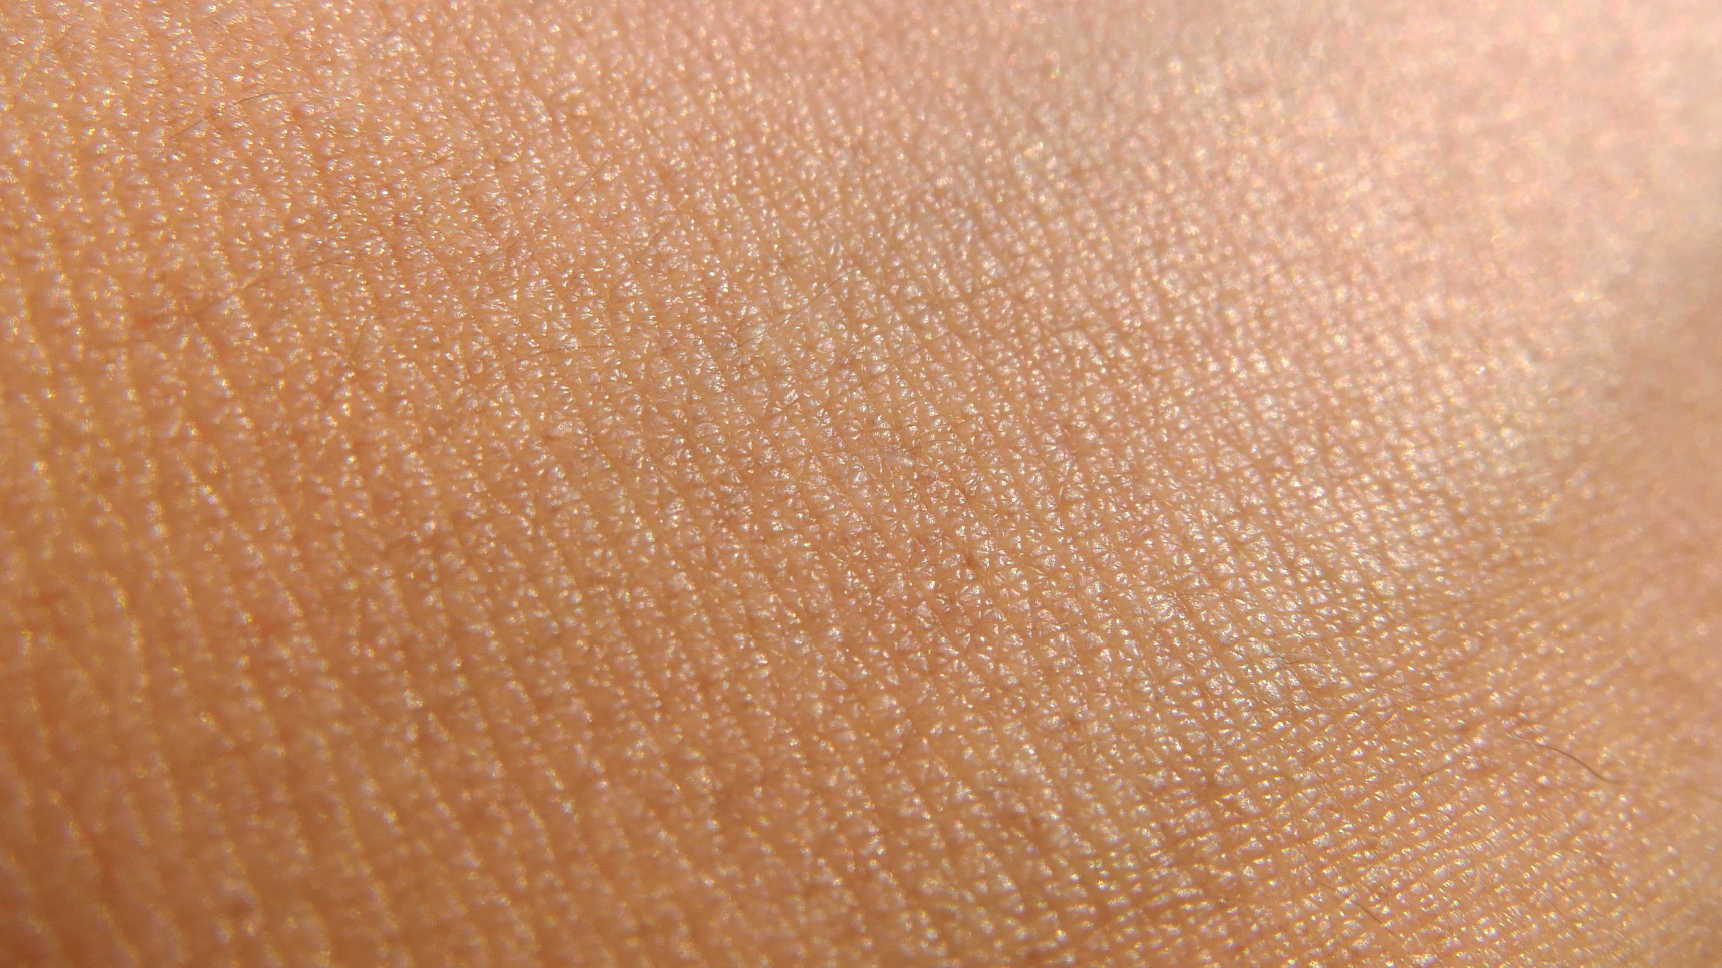 A close-up photograph of clear, young skin with no visible blemishes or acne.